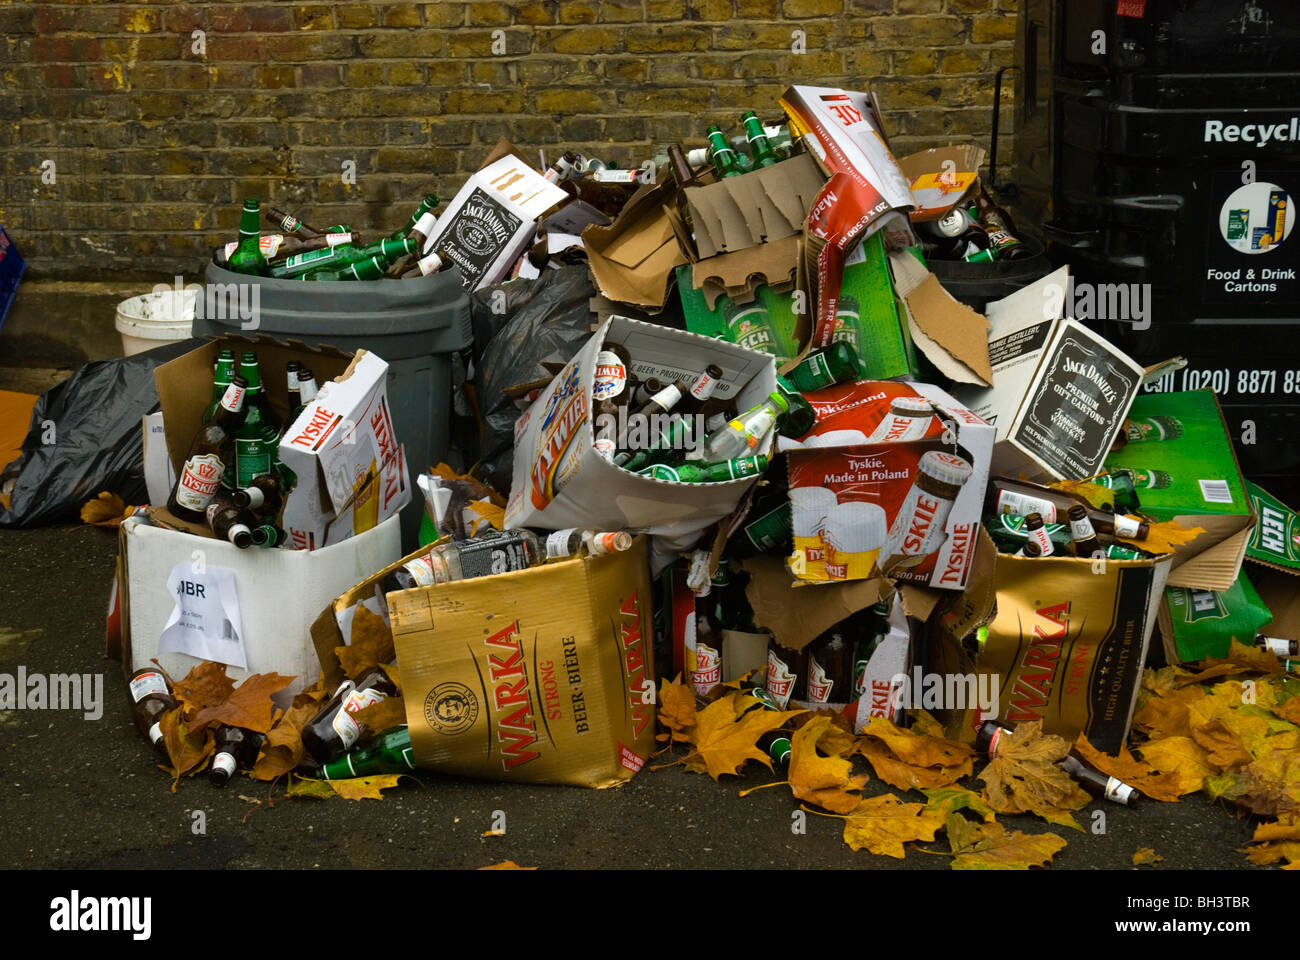 Empty Polish beer bottles and cardboard boxes in front of recycling bins Tooting London England UK Europe Stock Photo